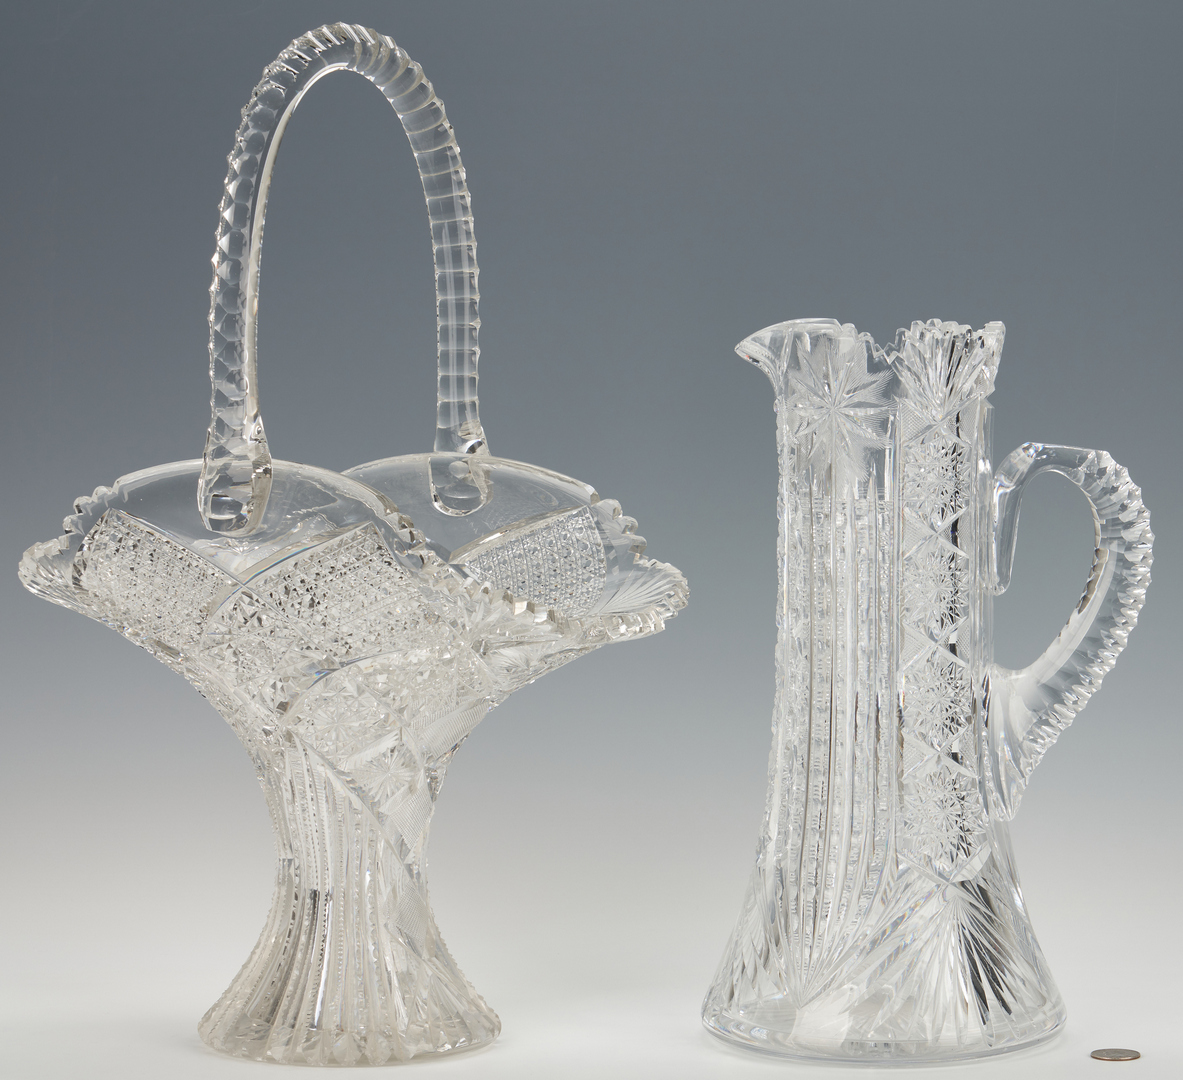 Lot 951: Large Cut Glass Flower Basket, 20"H, and Pitcher